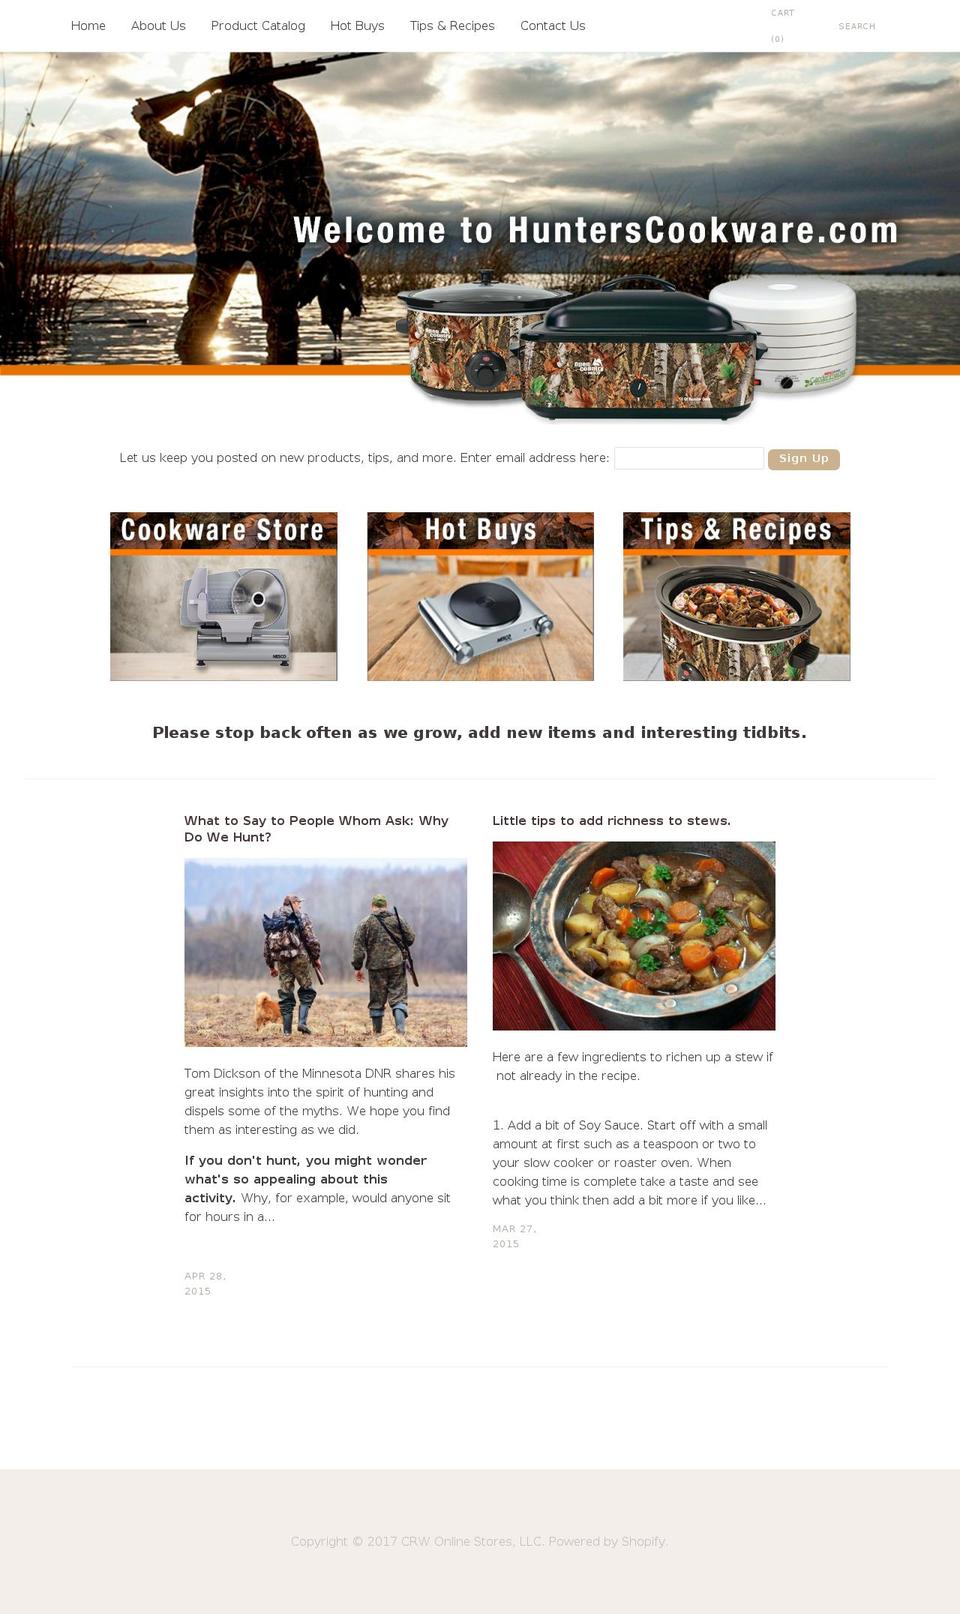 Cypress Shopify theme site example hunterscookware.com